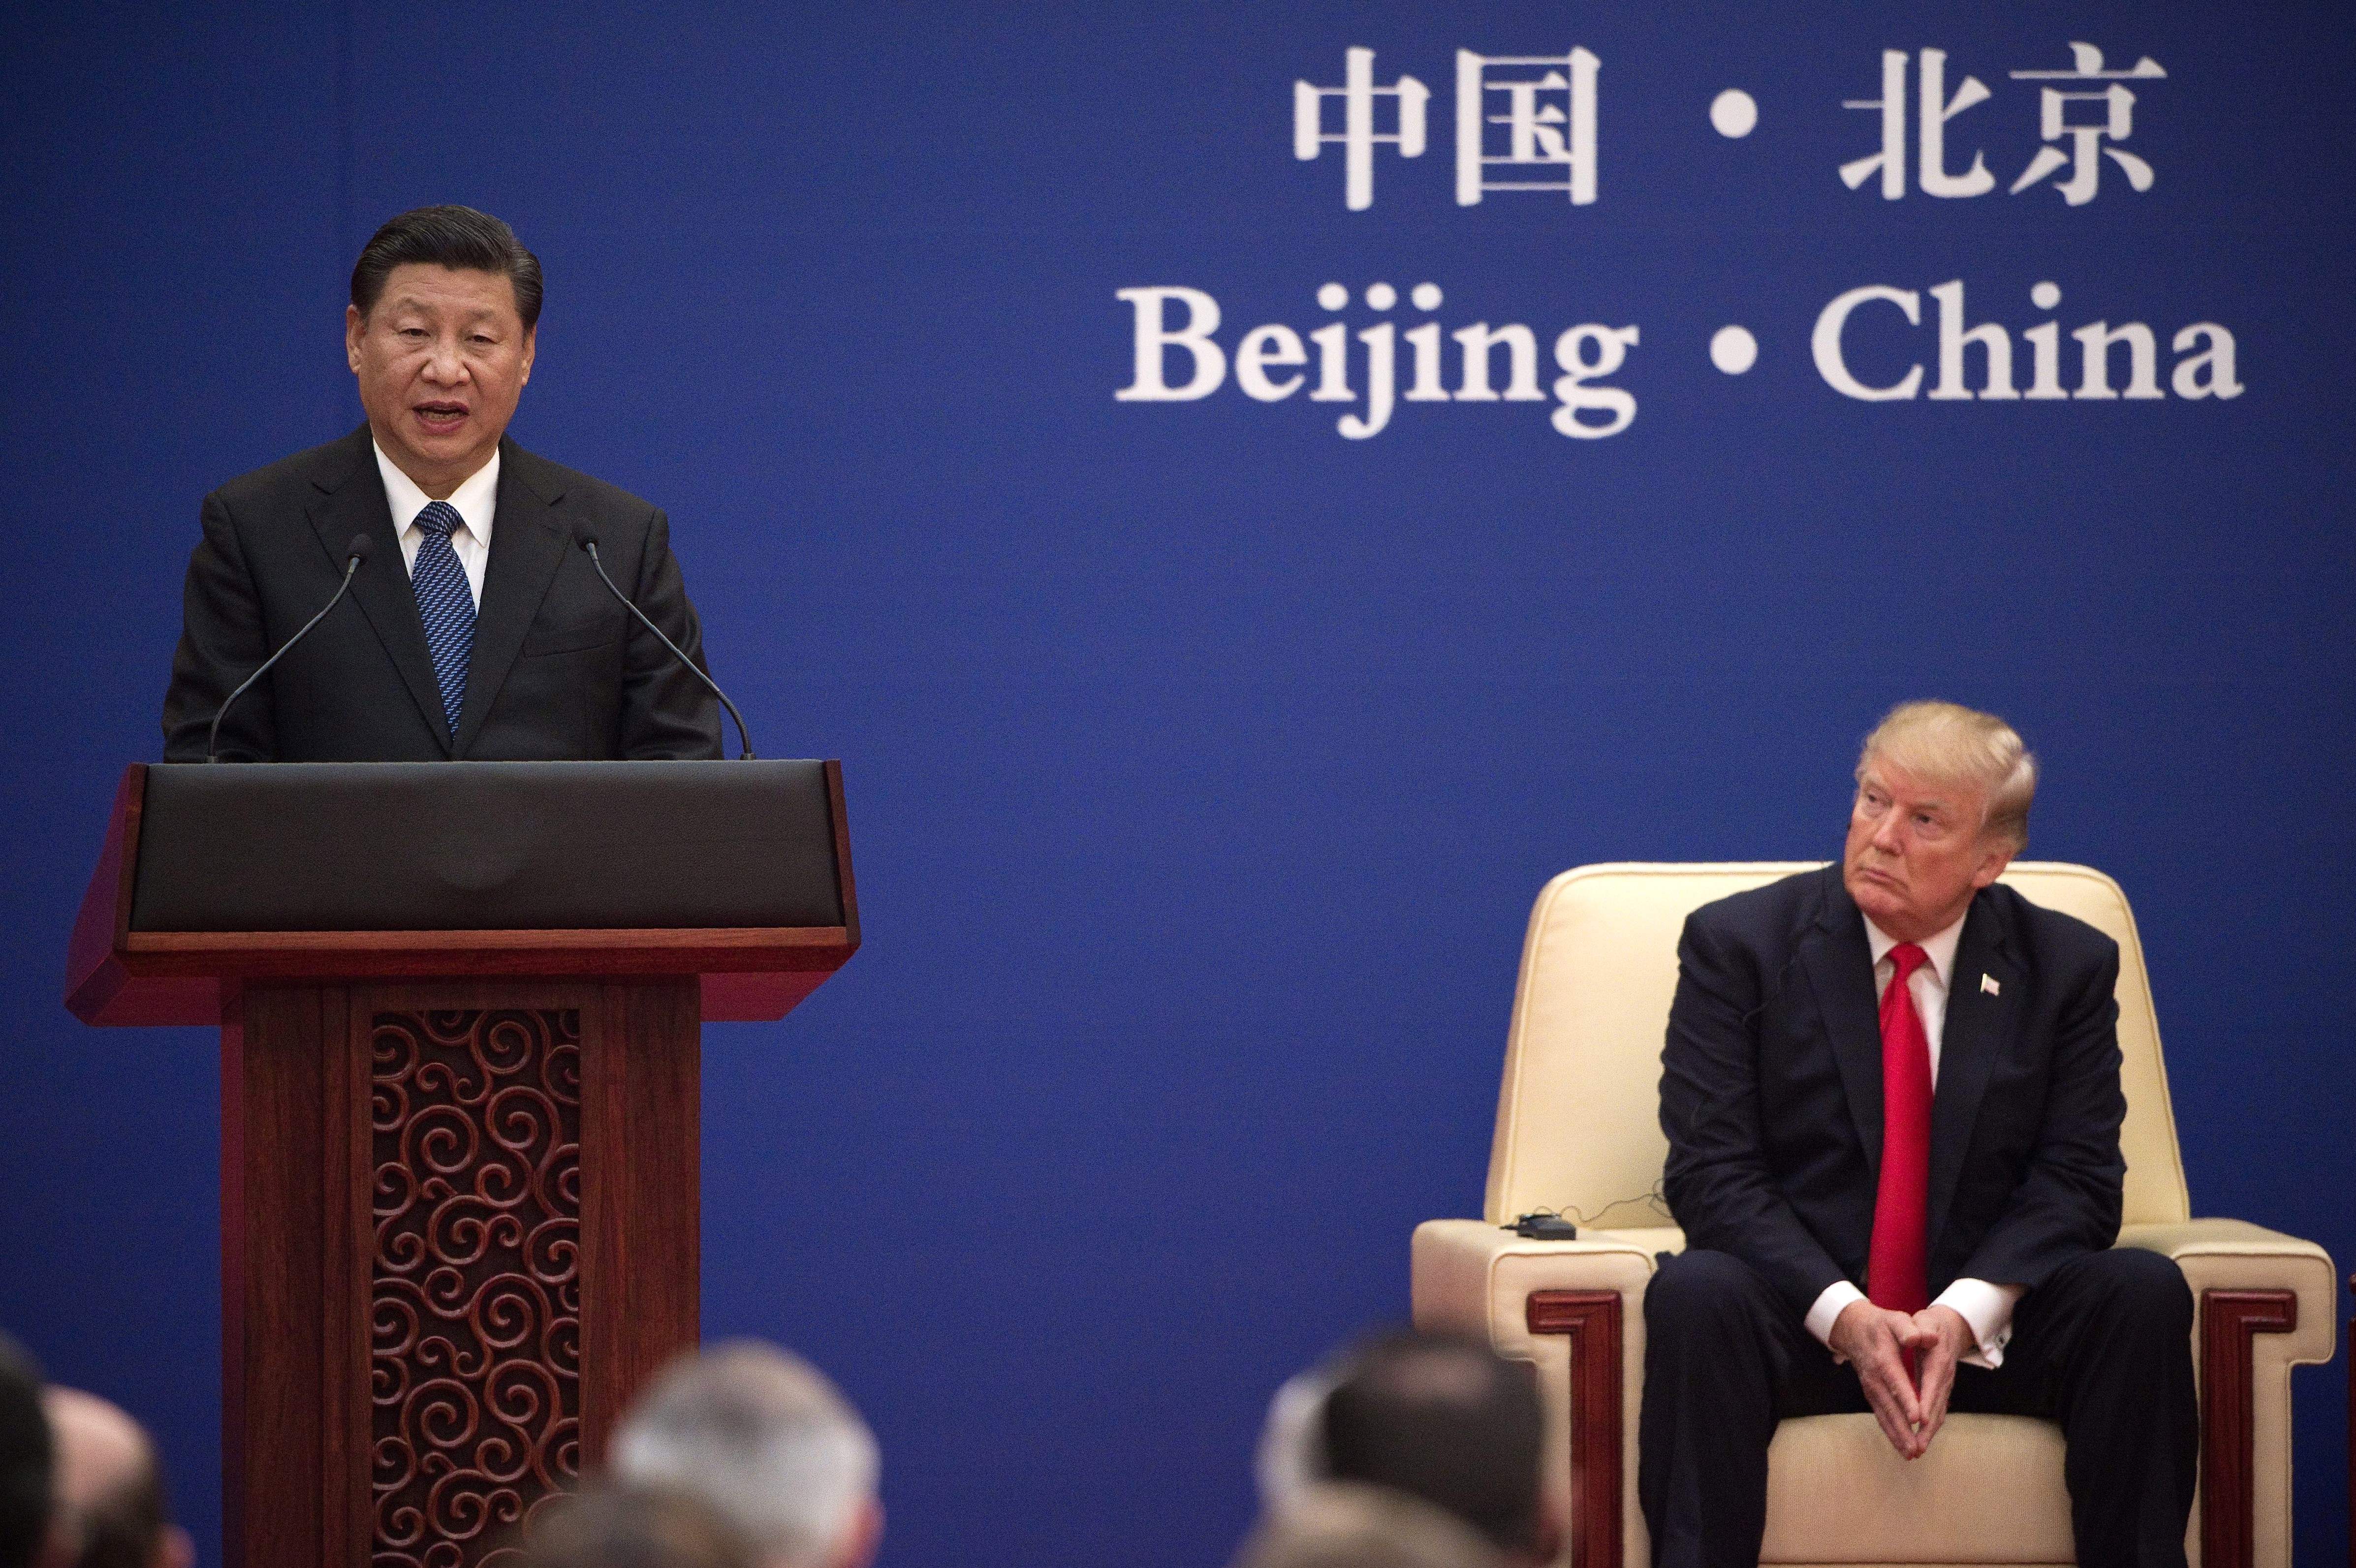 China's President Xi Jinping speaks next to US President Donald Trump during a business leaders event at the Great Hall of the People in Beijing on Nov. 9, 2017. (Nicolas Asfouri—AFP/Getty Images)